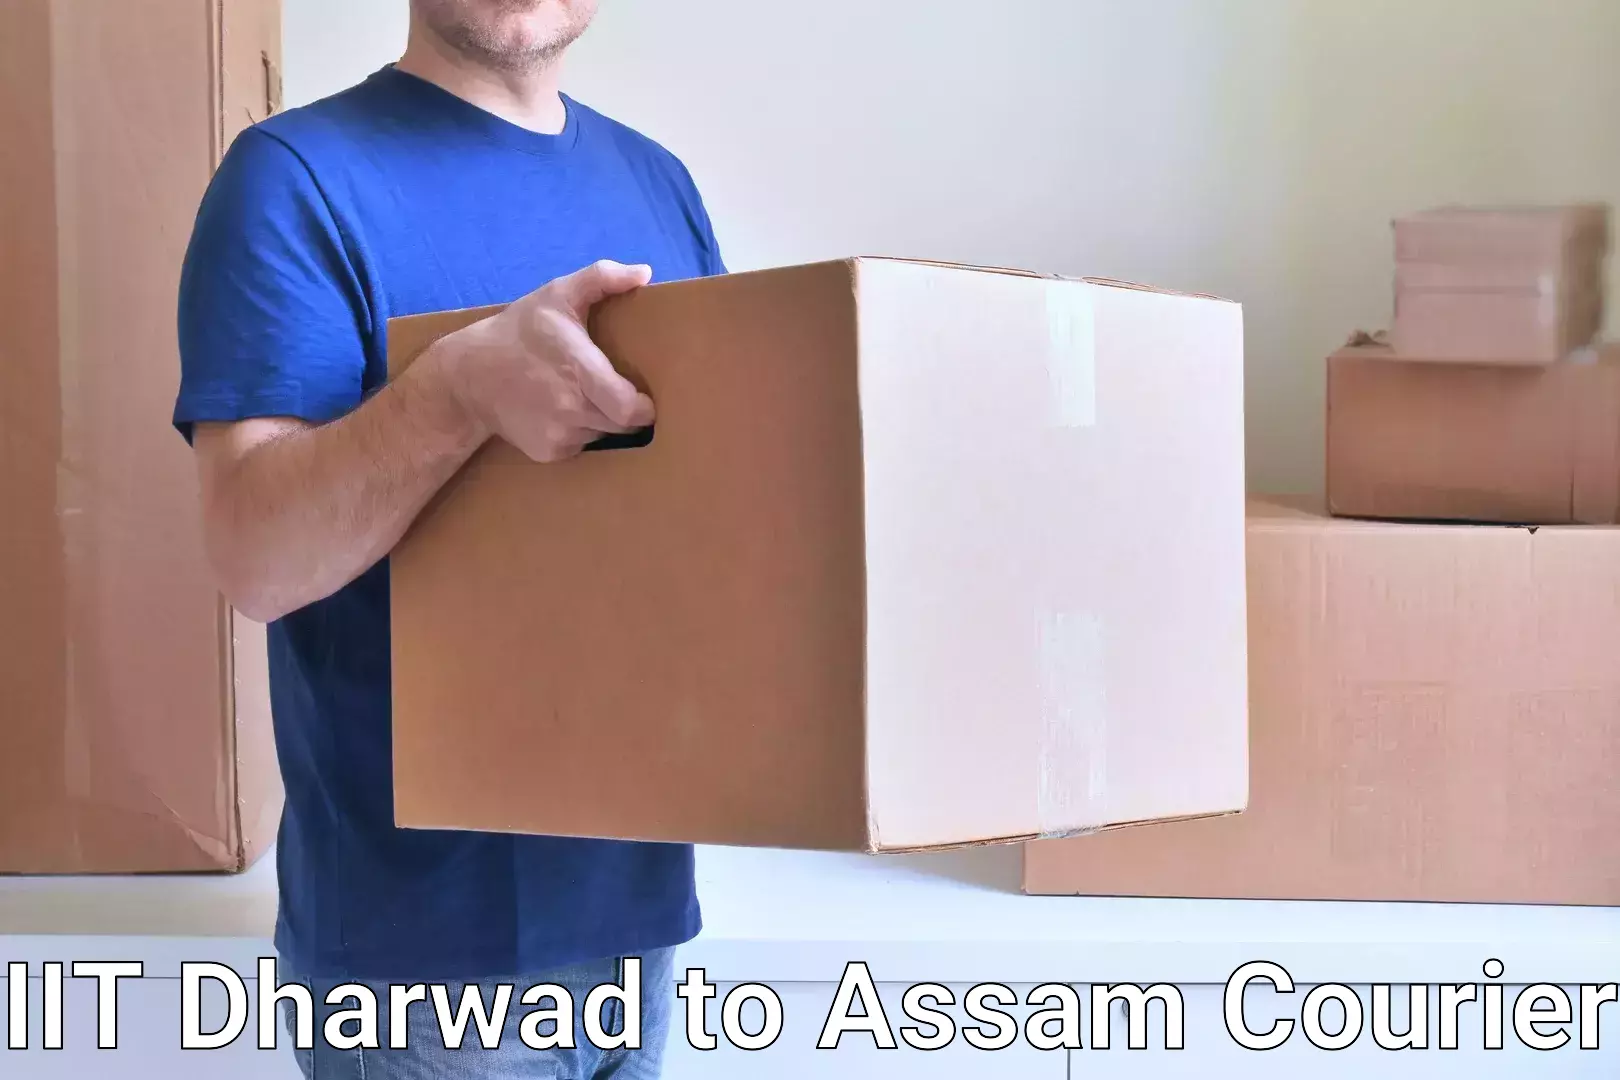 Courier service efficiency IIT Dharwad to Assam